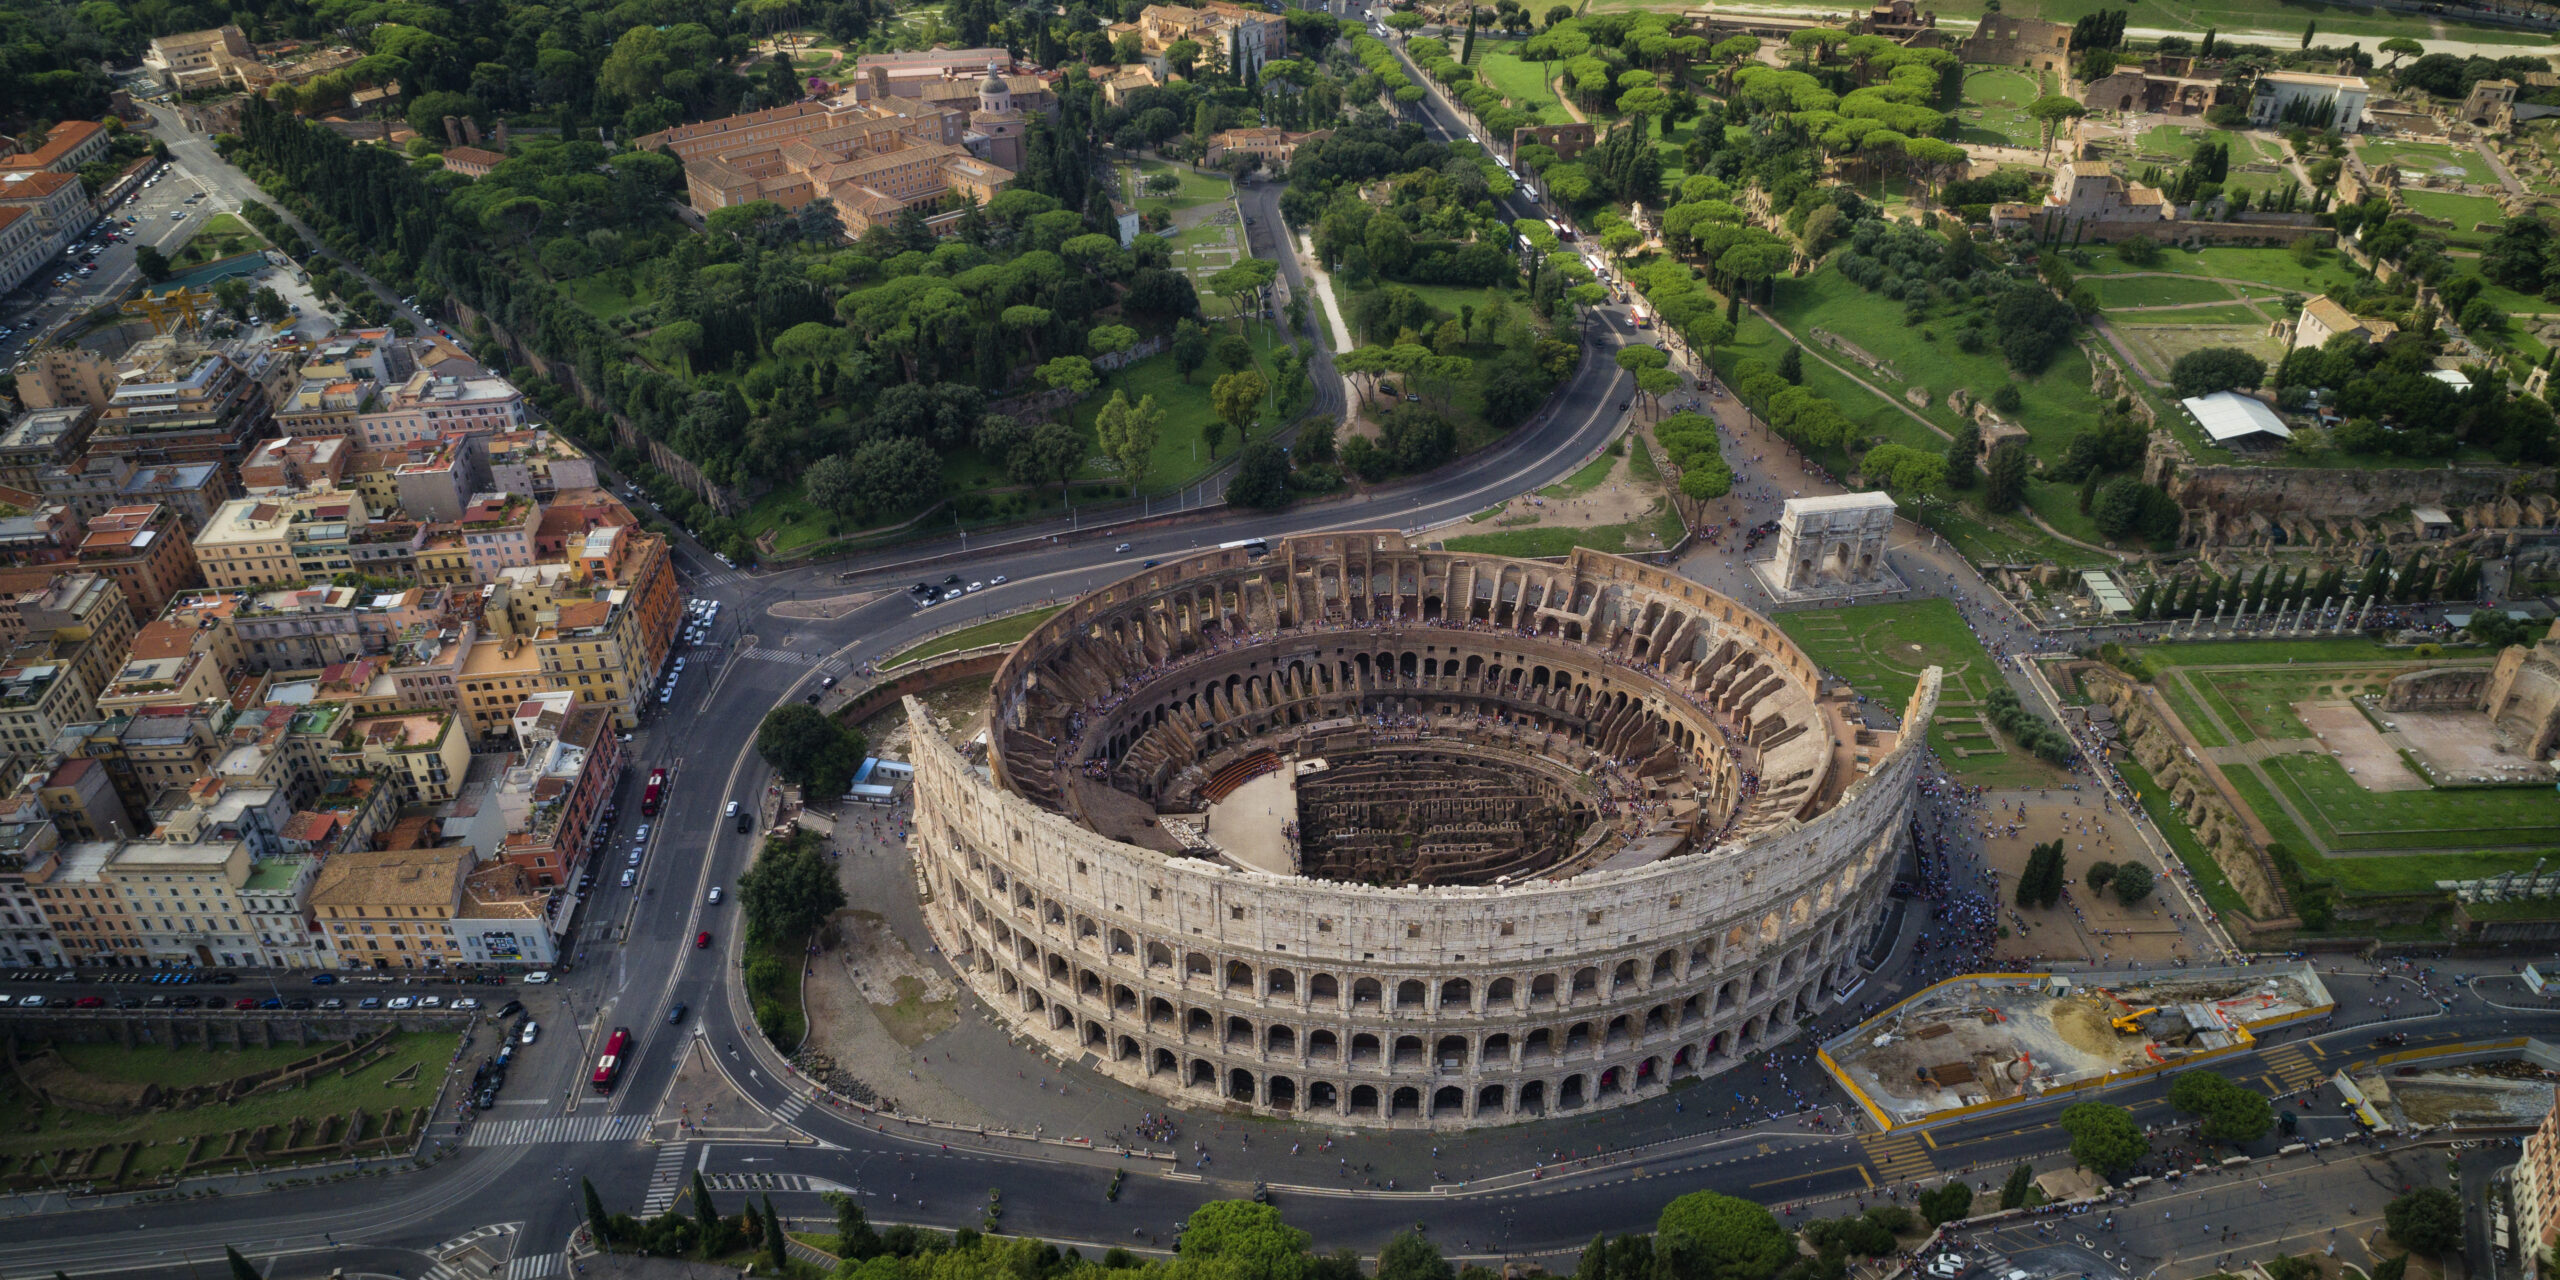 This is an aerial view of the Colosseum in the city of Rome, Italy